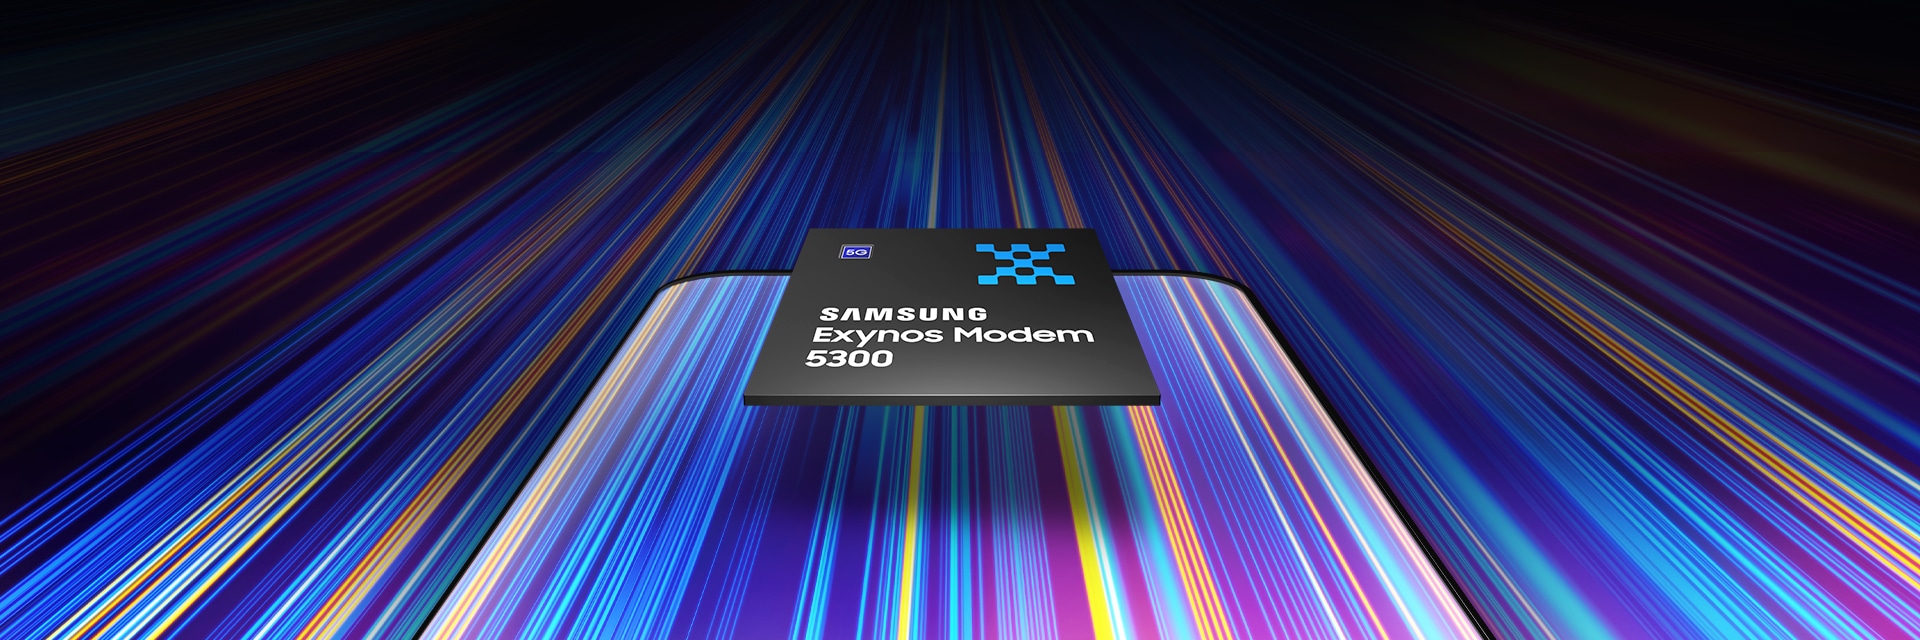 Exynos Modem 5300 processor, which enables 5G speeds, 10 gigabits per second, ultra-low latency